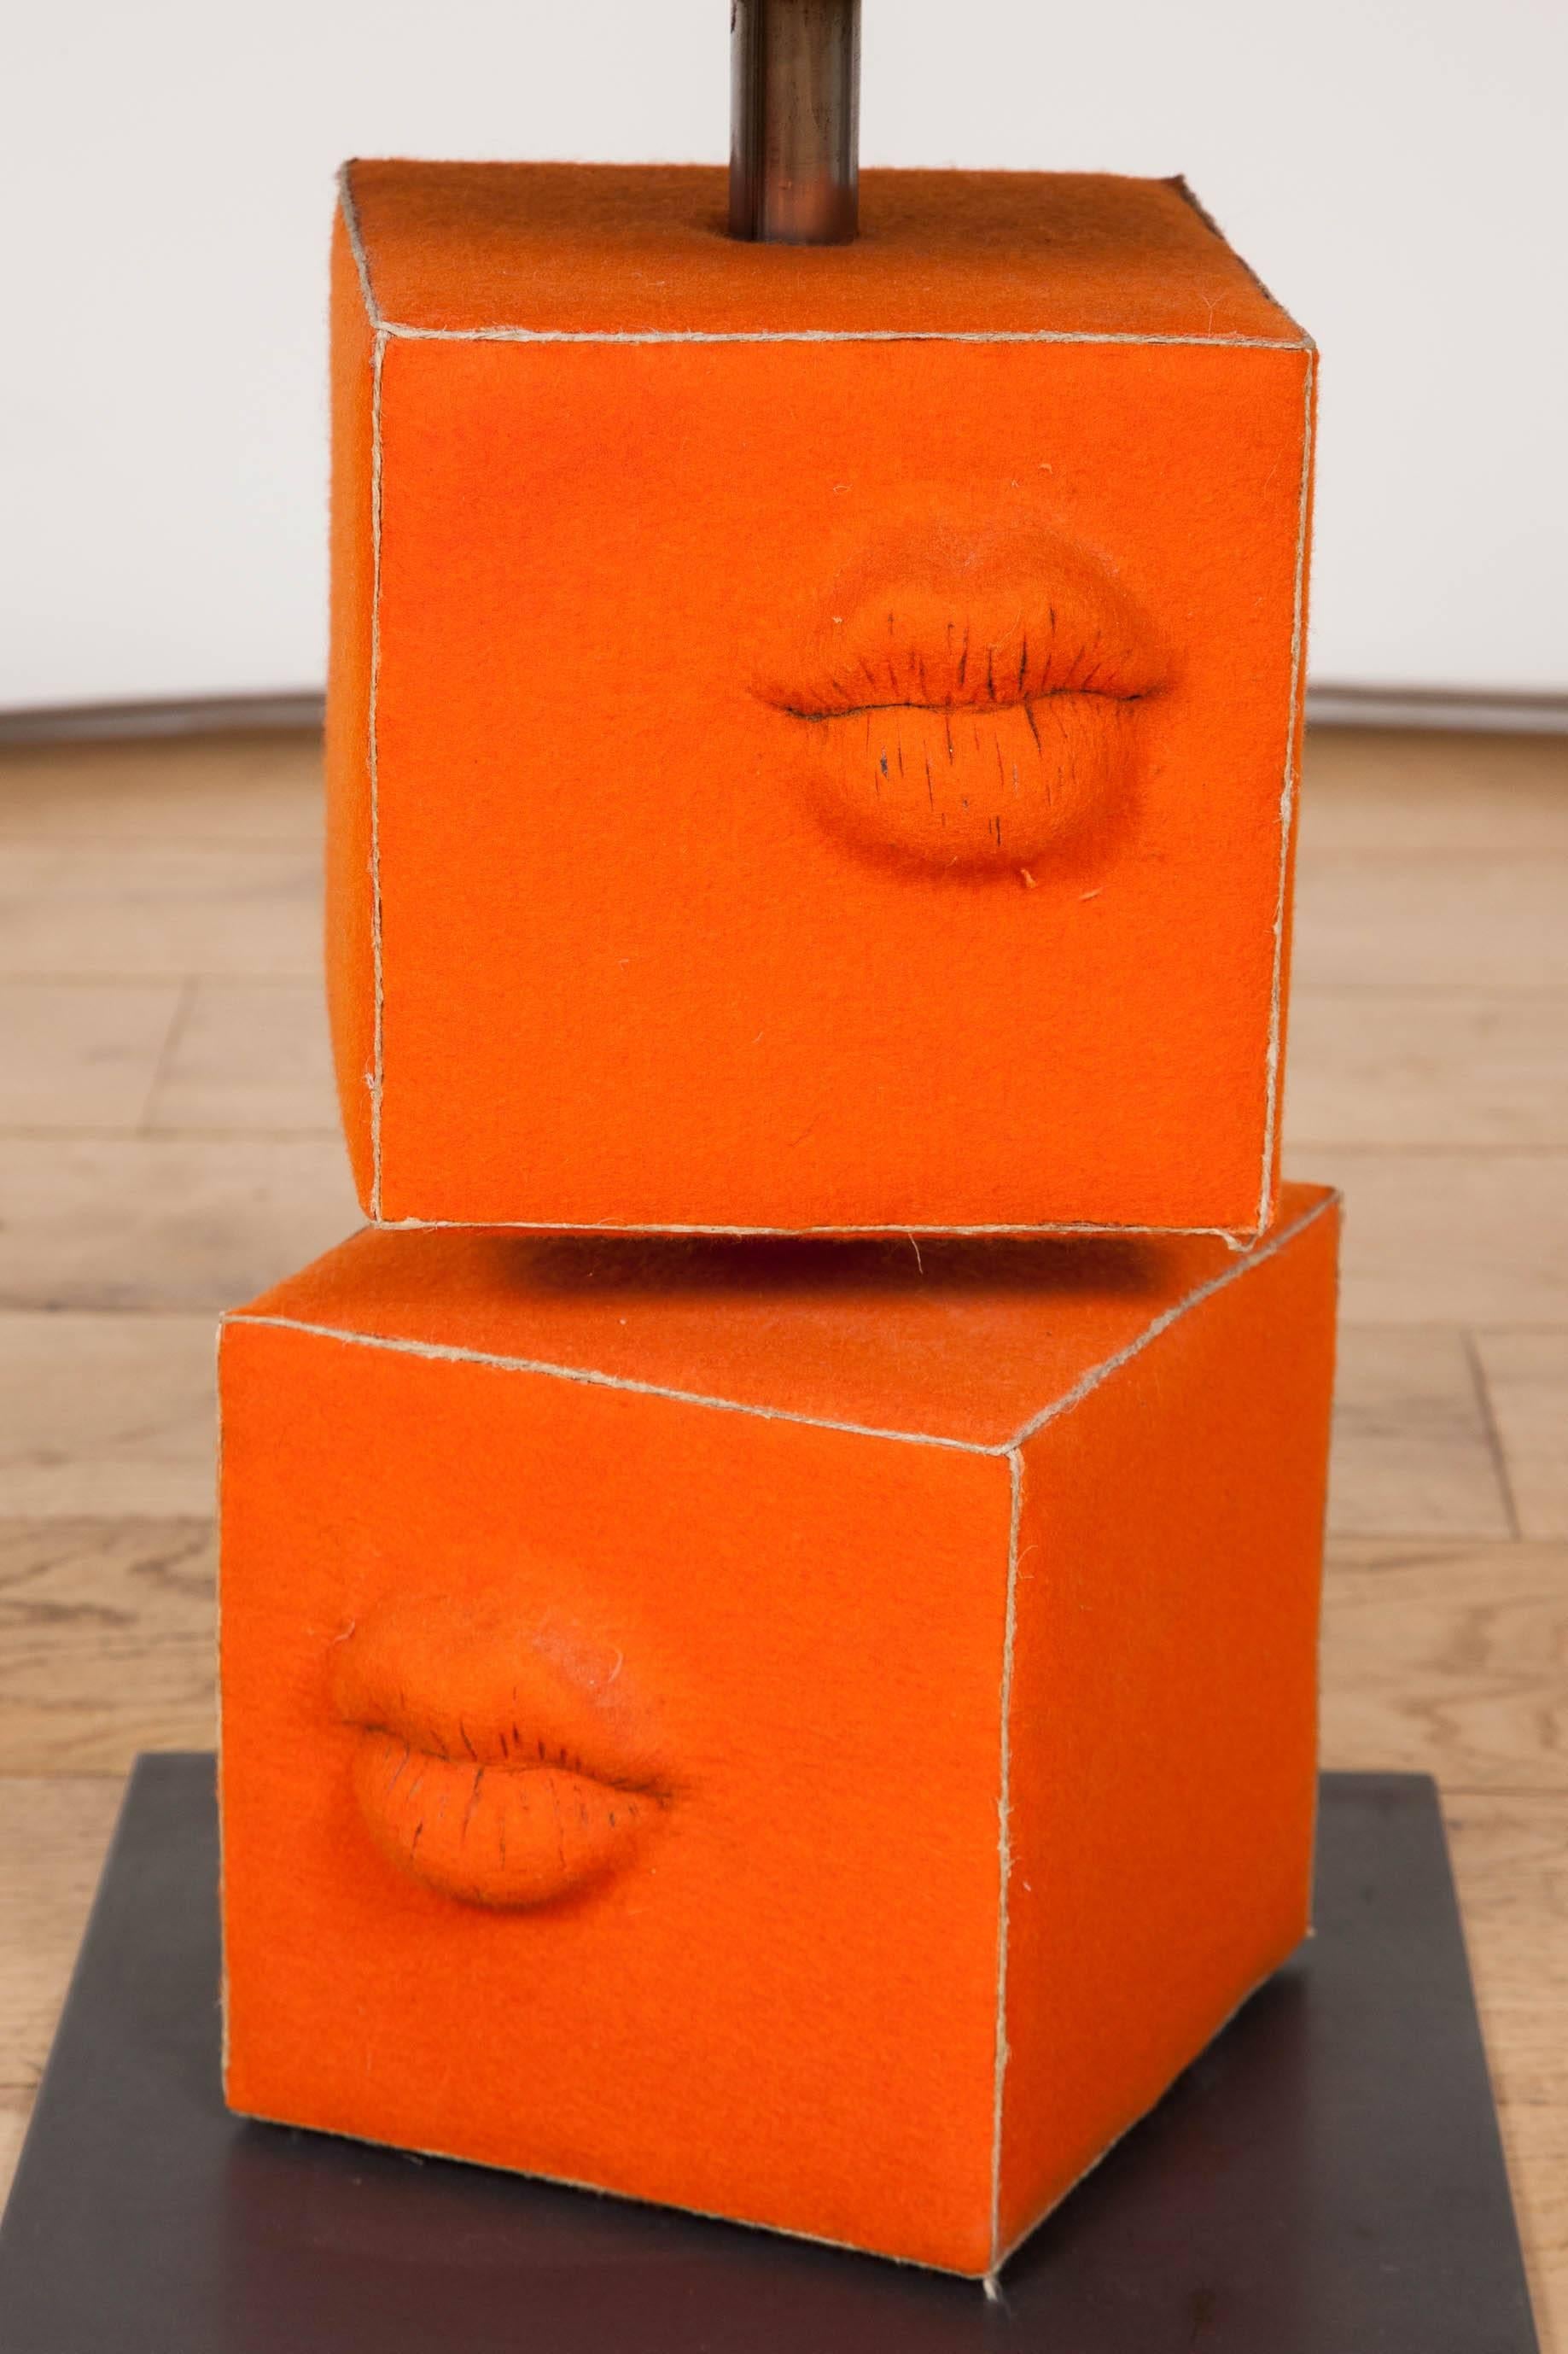 Contemporary, French 
An imaginative and witty design, the stool has 2 stacked, orange felt 'cubes' with lips emerging in relief topped with a patinated metal seat.
Both felt cubes can be pivoted independent of the other on the shaft.